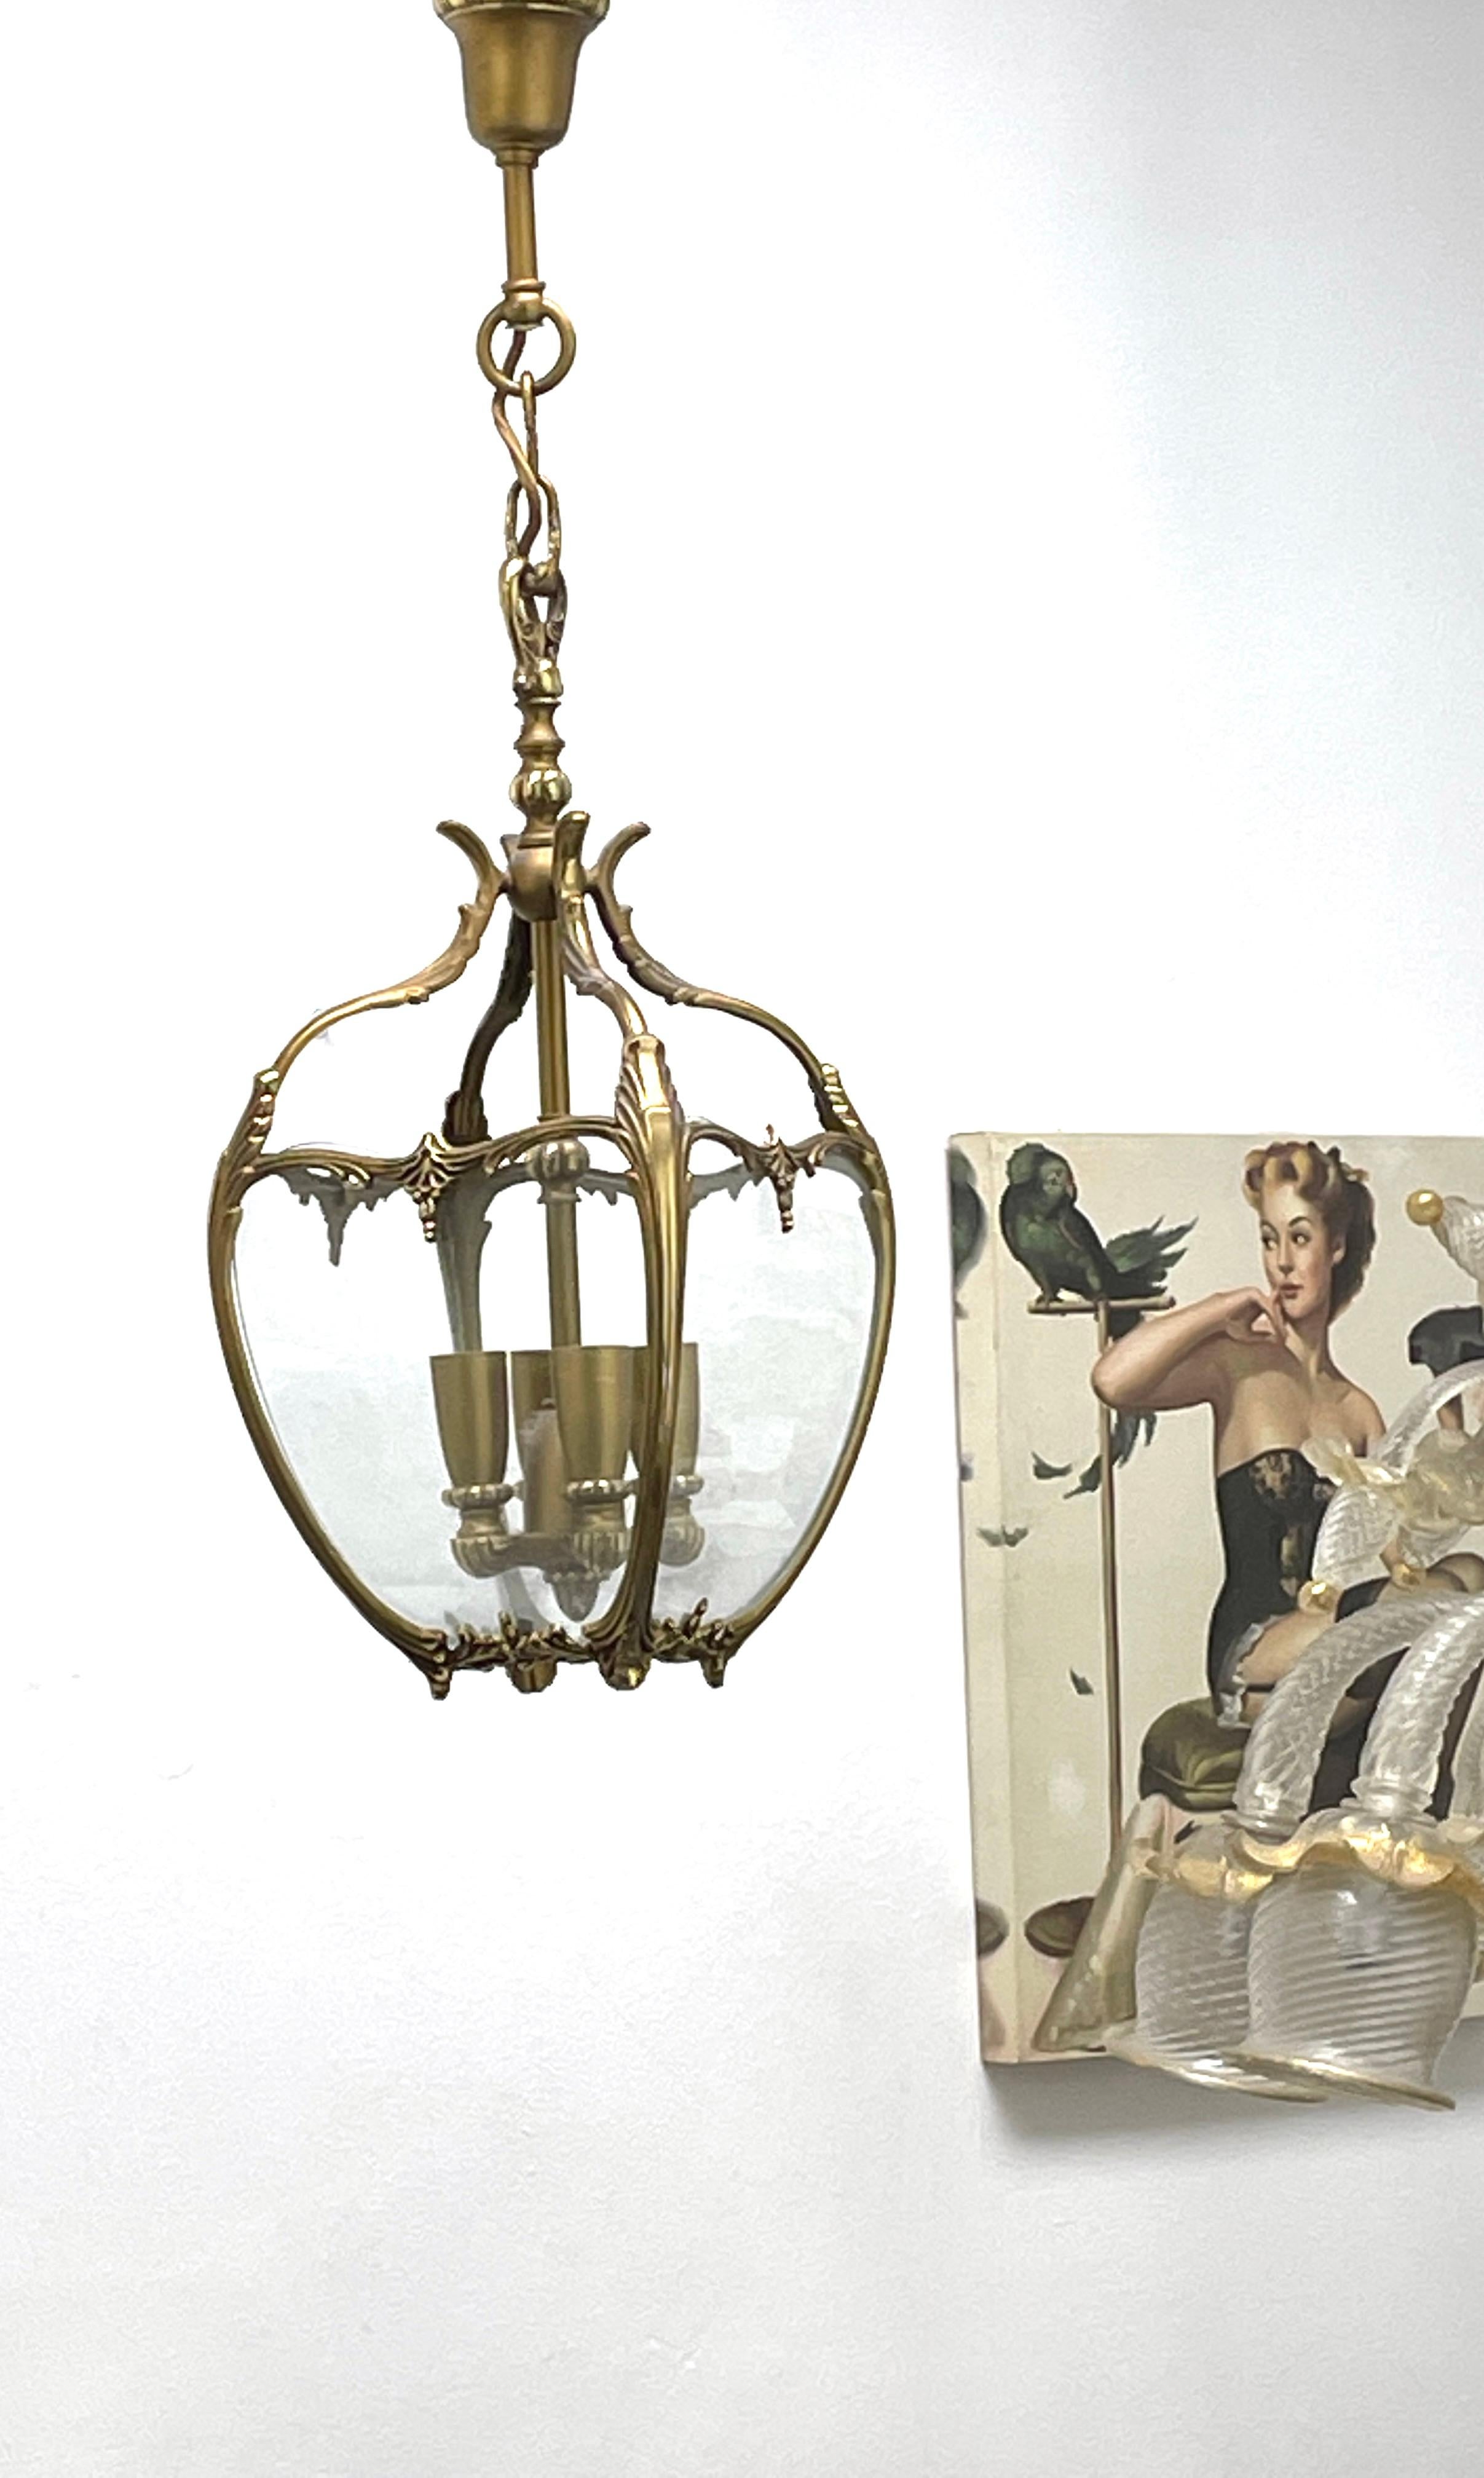 Add a touch of opulence to your home with this charming lantern pendant light. Perfect metal and glass to enhance any chic or eclectic home. We'd love to see it hanging in an entryway as a charming welcome home. Built in the 1960s, in Germany, this